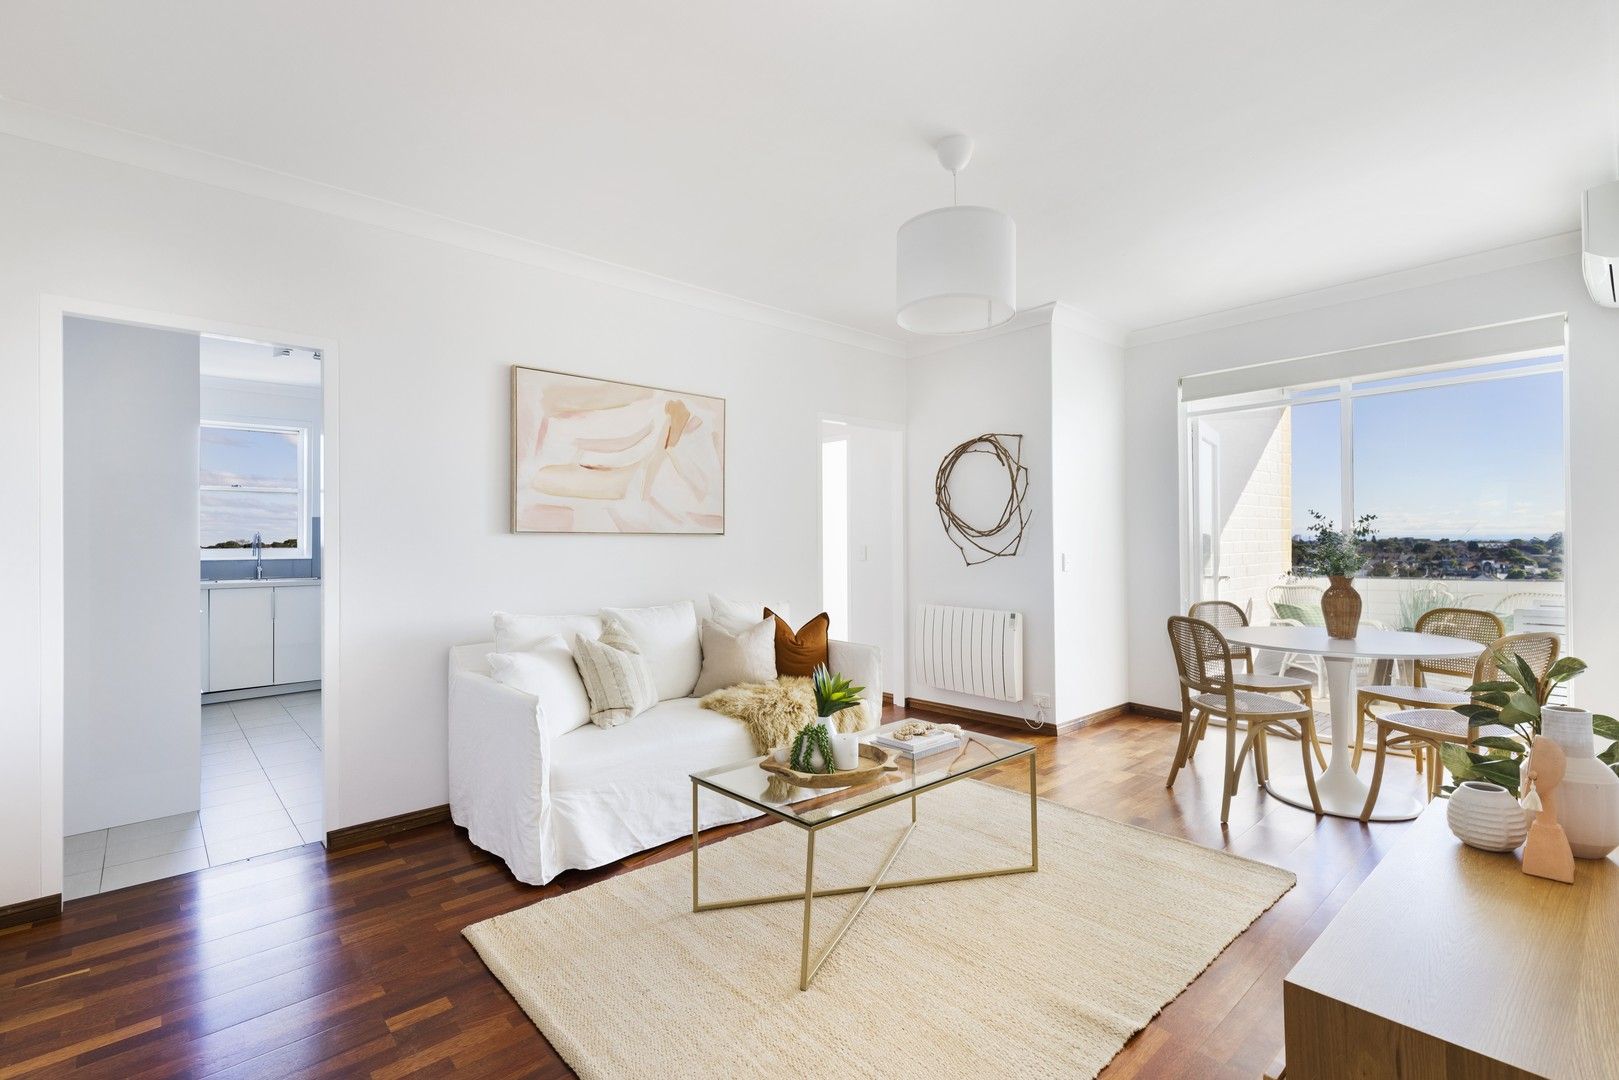 2 bedrooms Apartment / Unit / Flat in 44/44 Collins Street ANNANDALE NSW, 2038